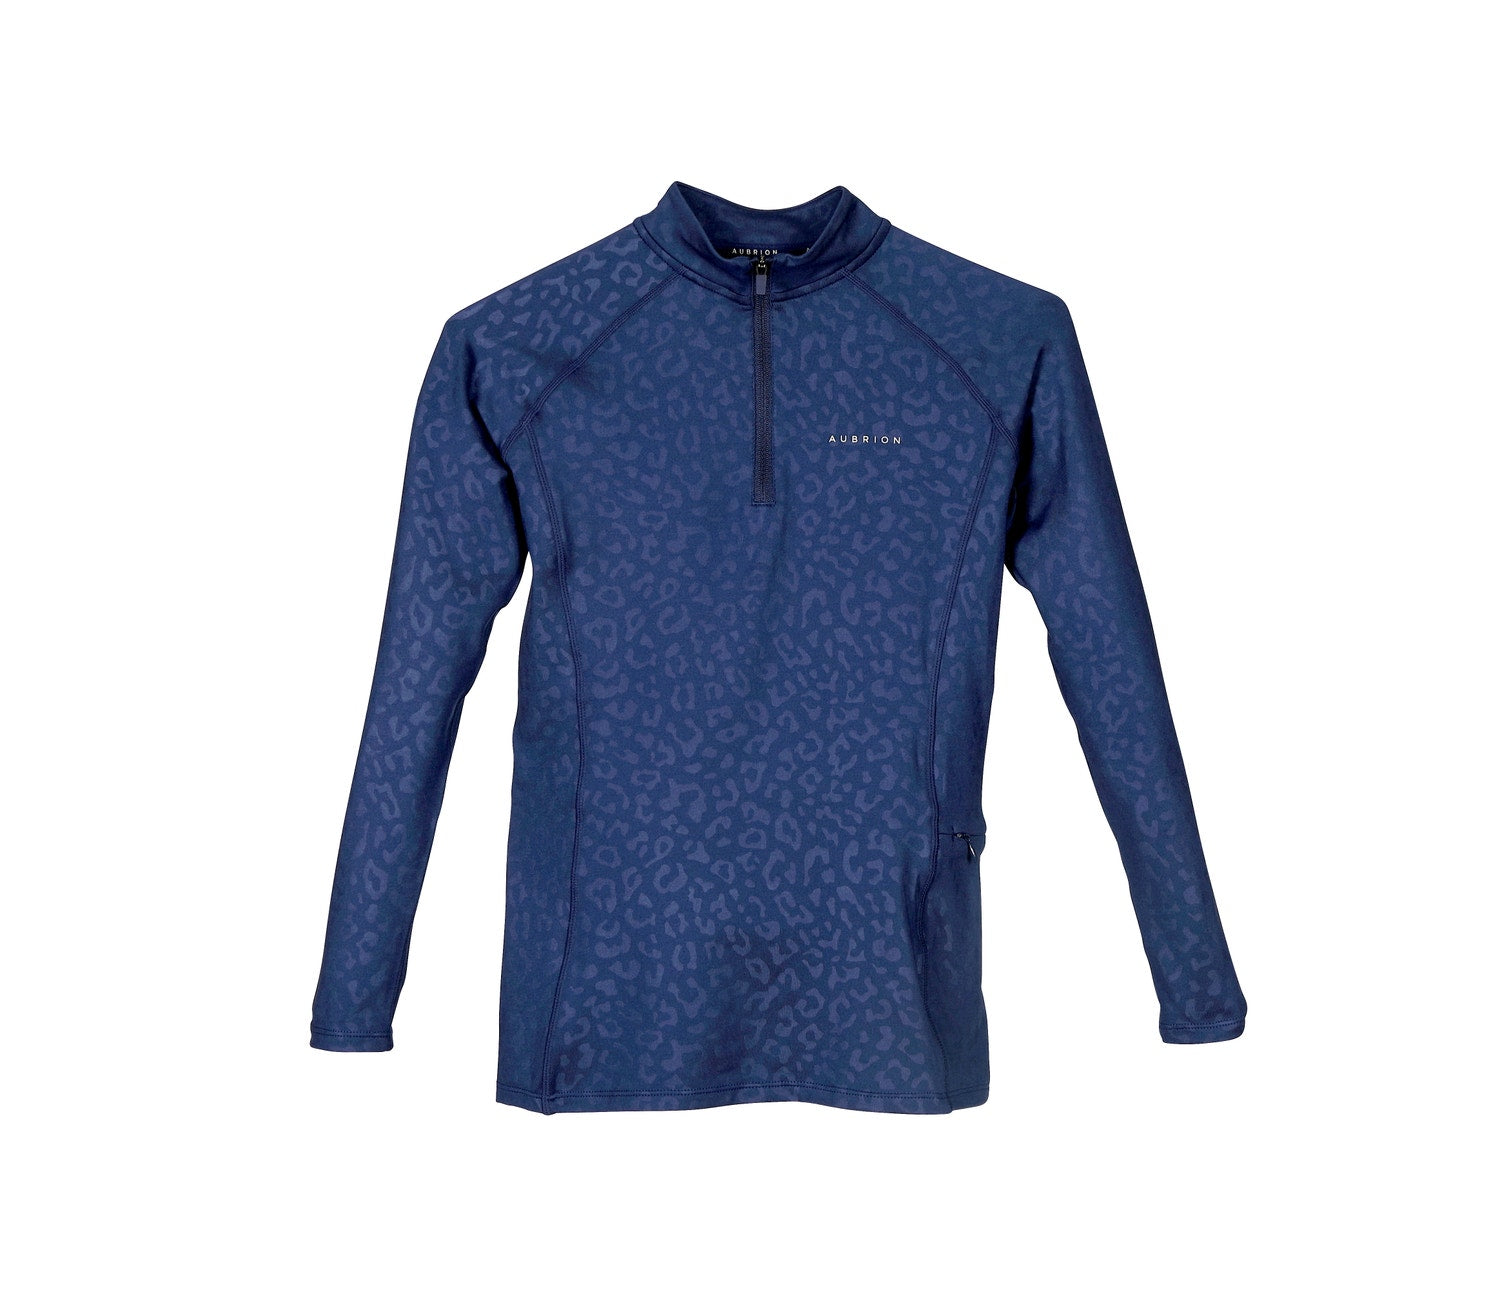 Shires Aubrion Revive youth baselayer